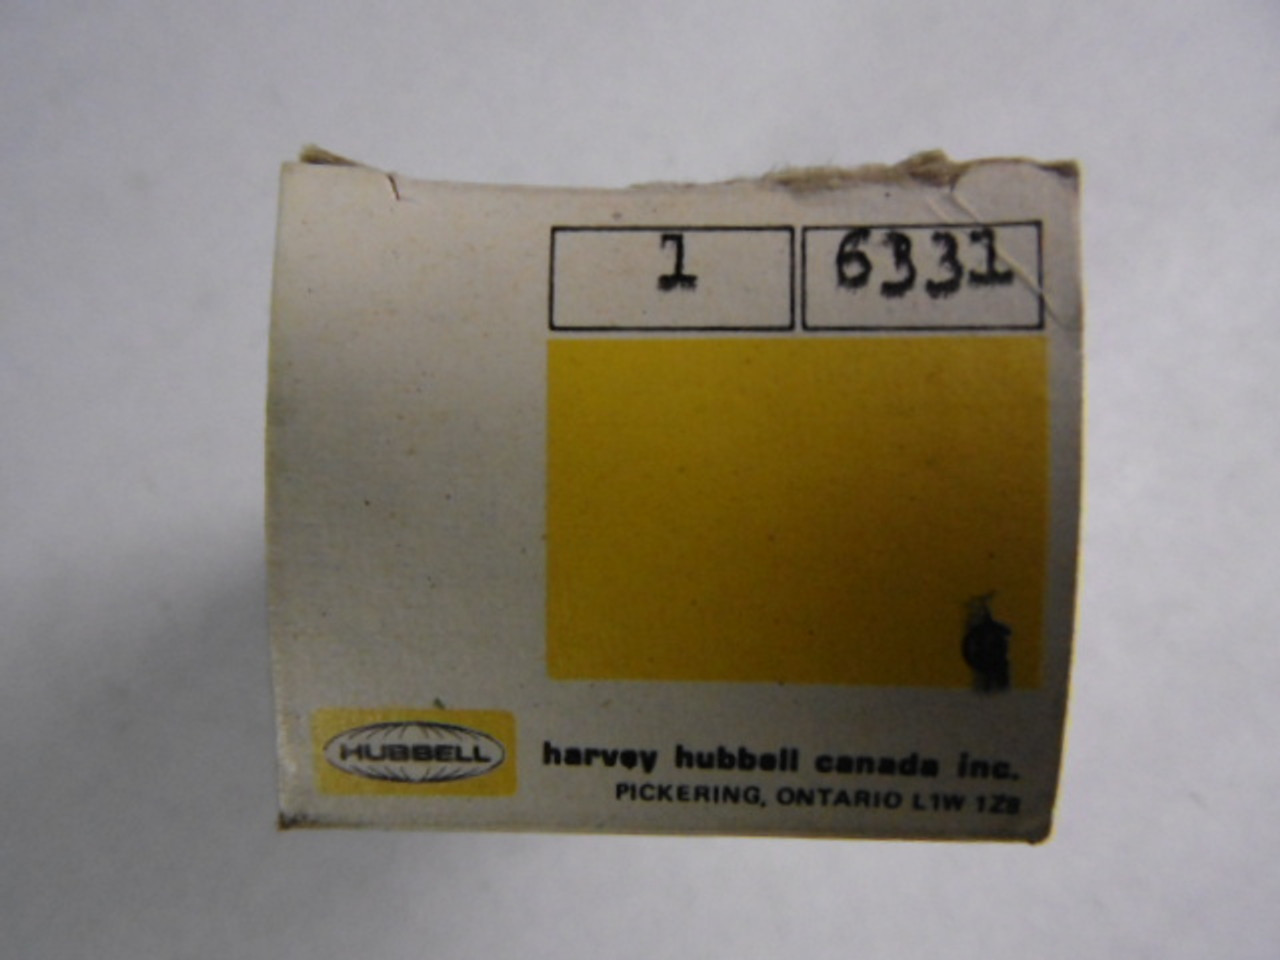 Hubbell 6331 Receptacle 20A 125V ! NEW !